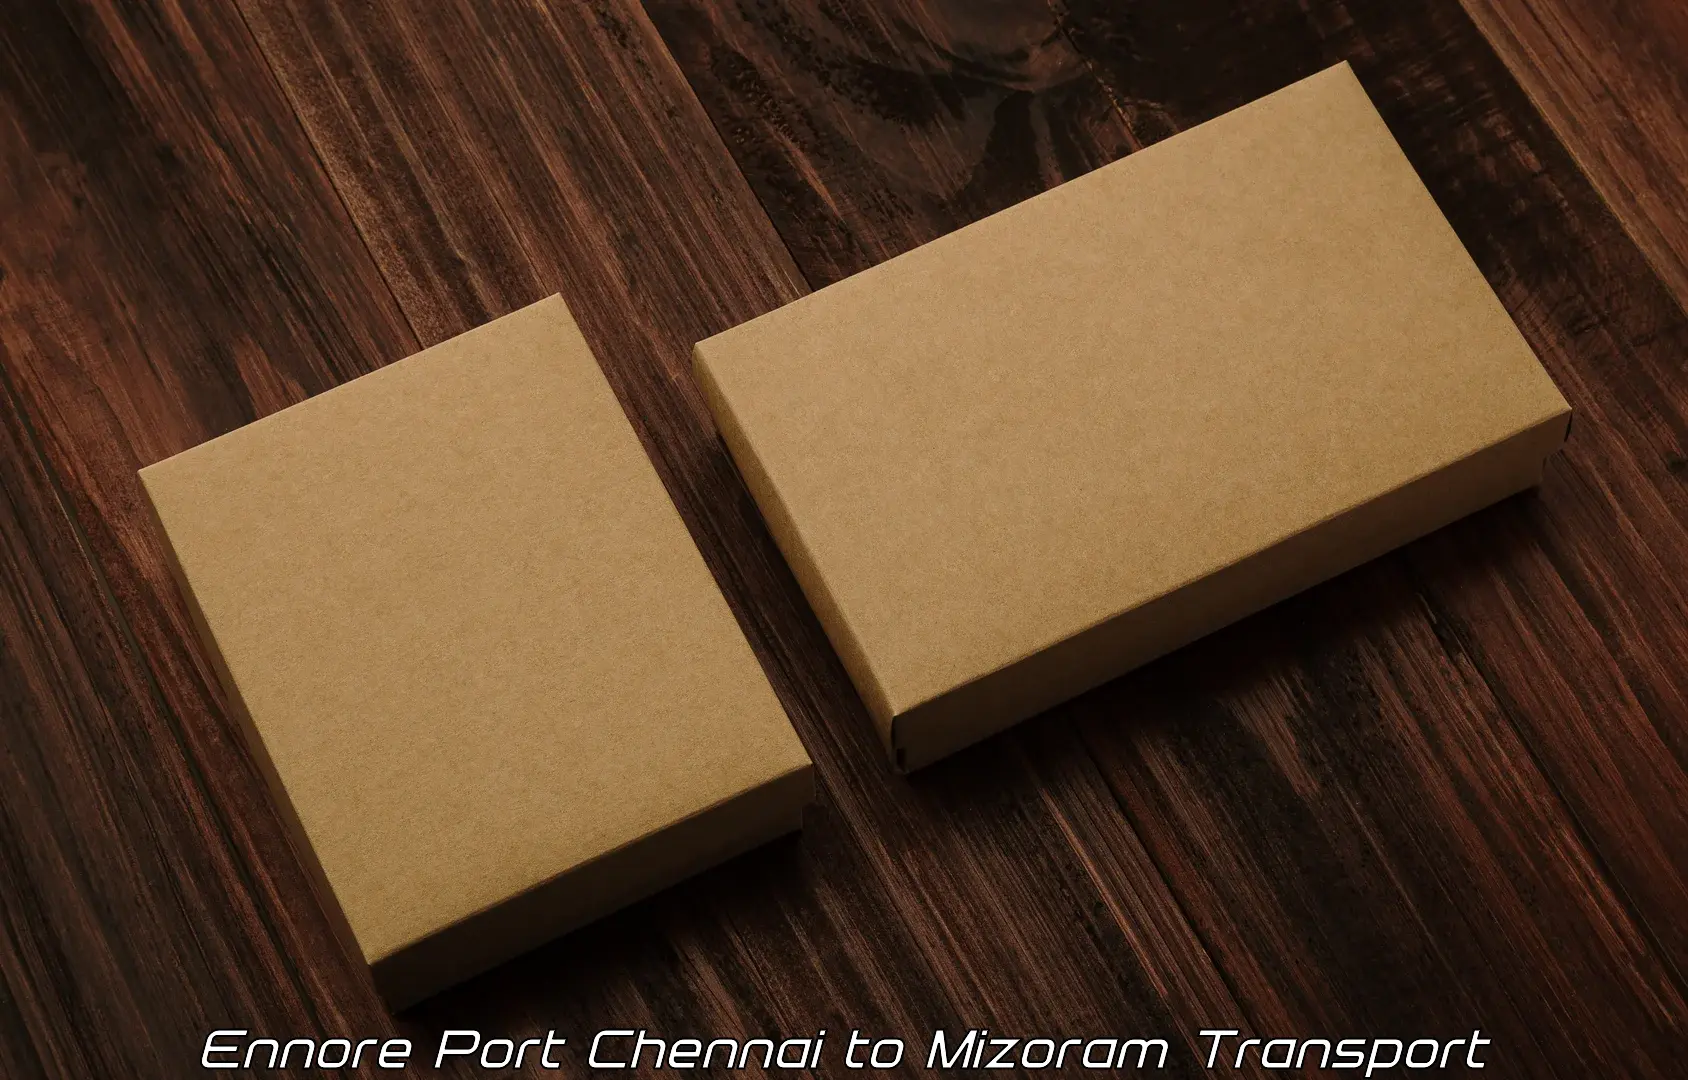 Goods delivery service Ennore Port Chennai to Aizawl